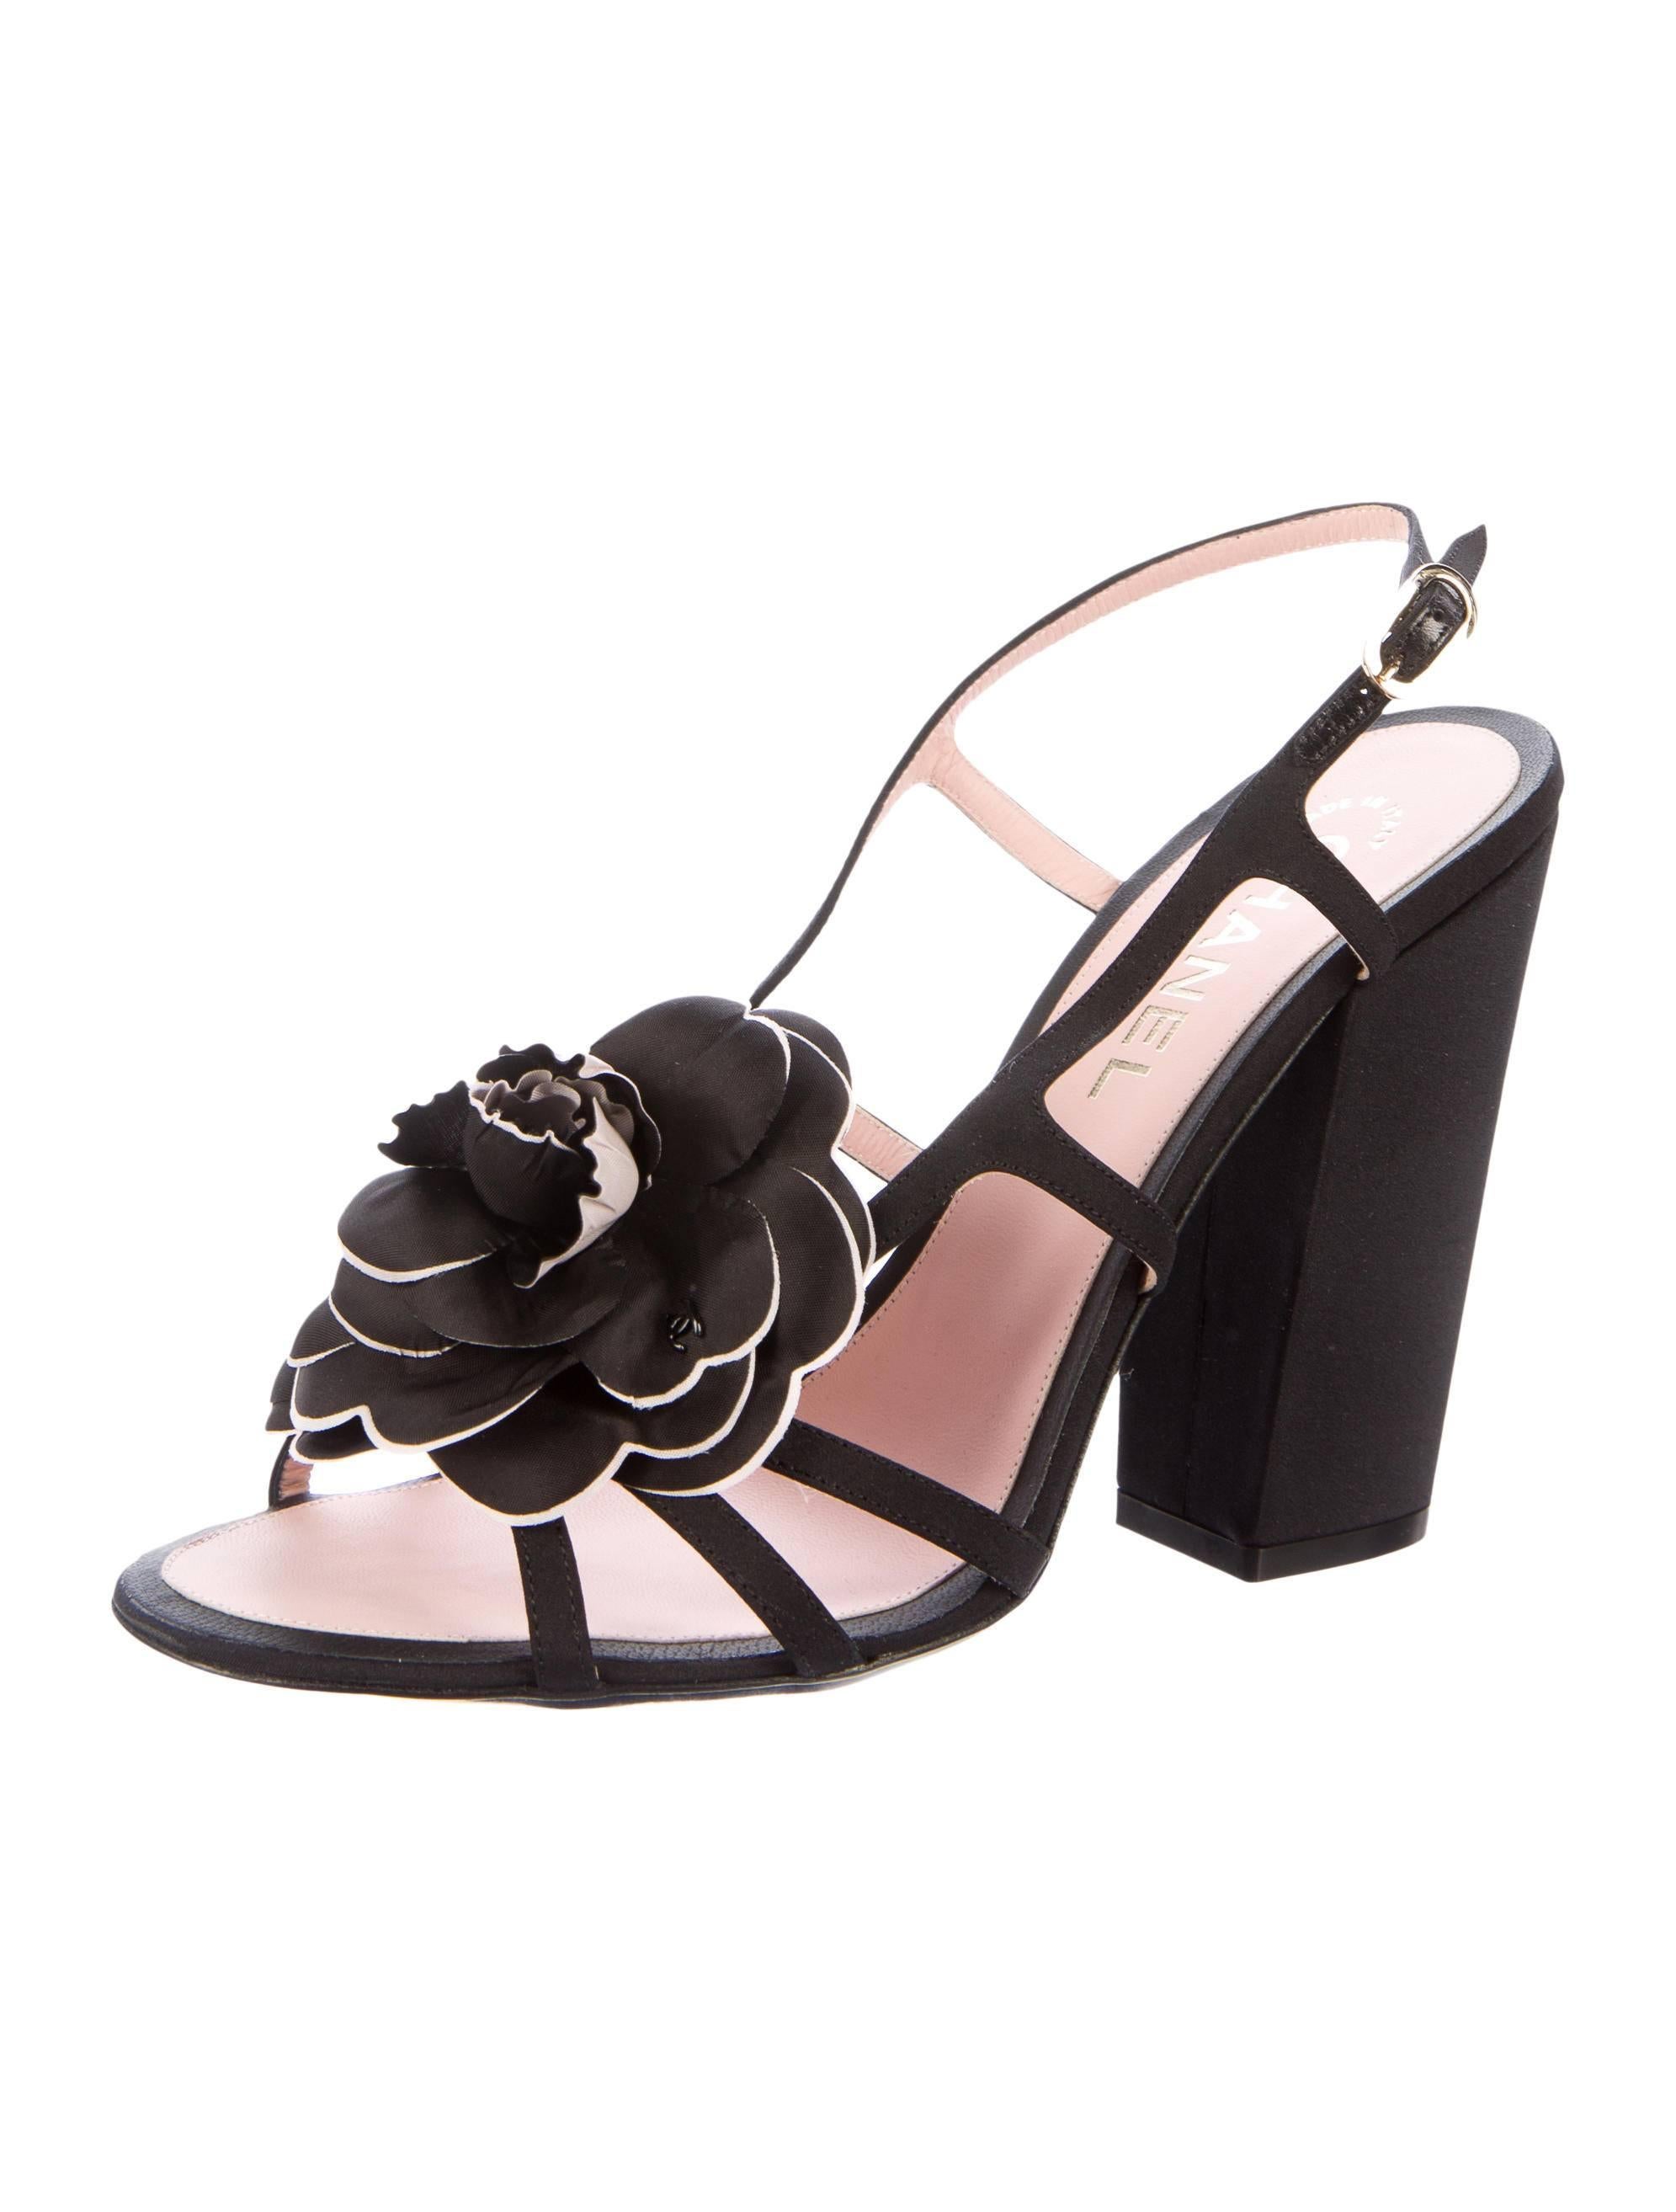 CURATOR'S NOTES

Chanel NEW & SOLD OUT Black Flower Cut Out Sandals Heels in Box 

Size IT 40
Satin
Buckle closure
Made in Italy
Heel height 4.5"
Includes box original Chanel box